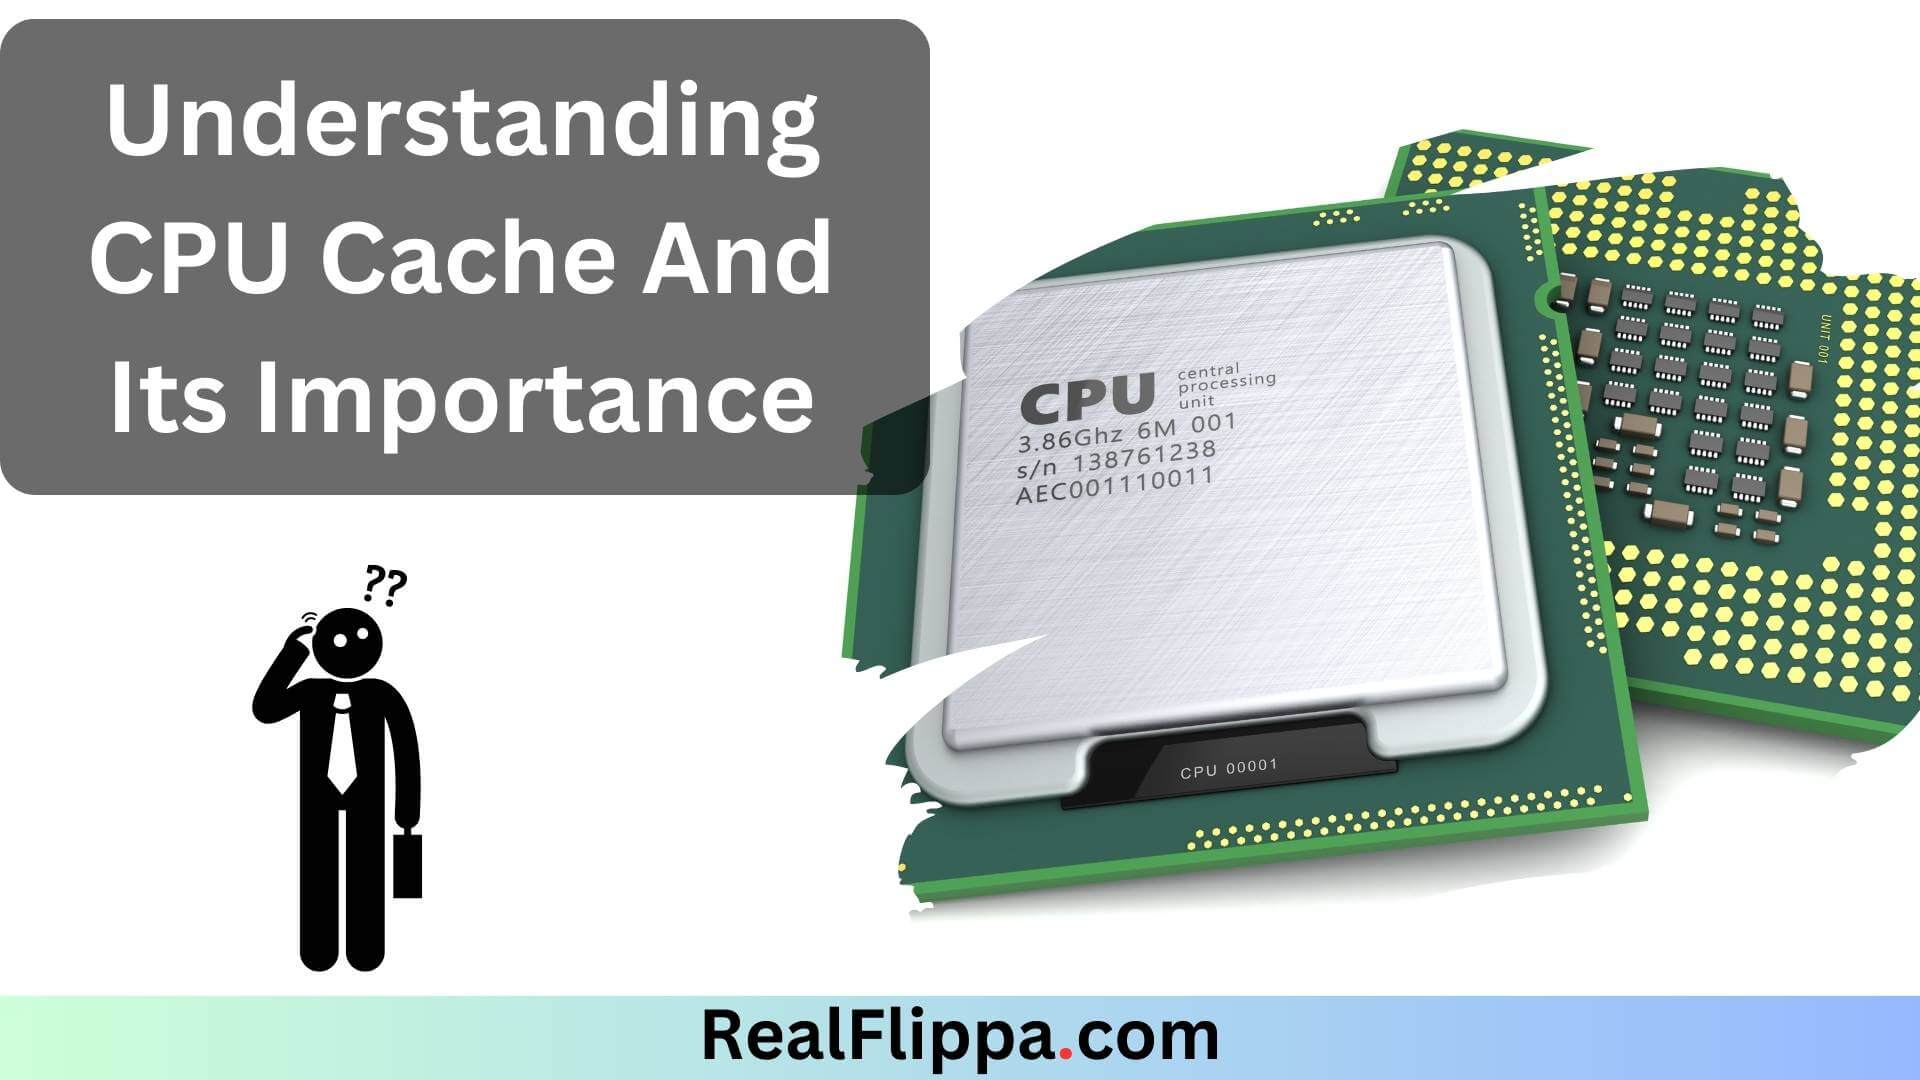 Understanding CPU Cache And Its Importance